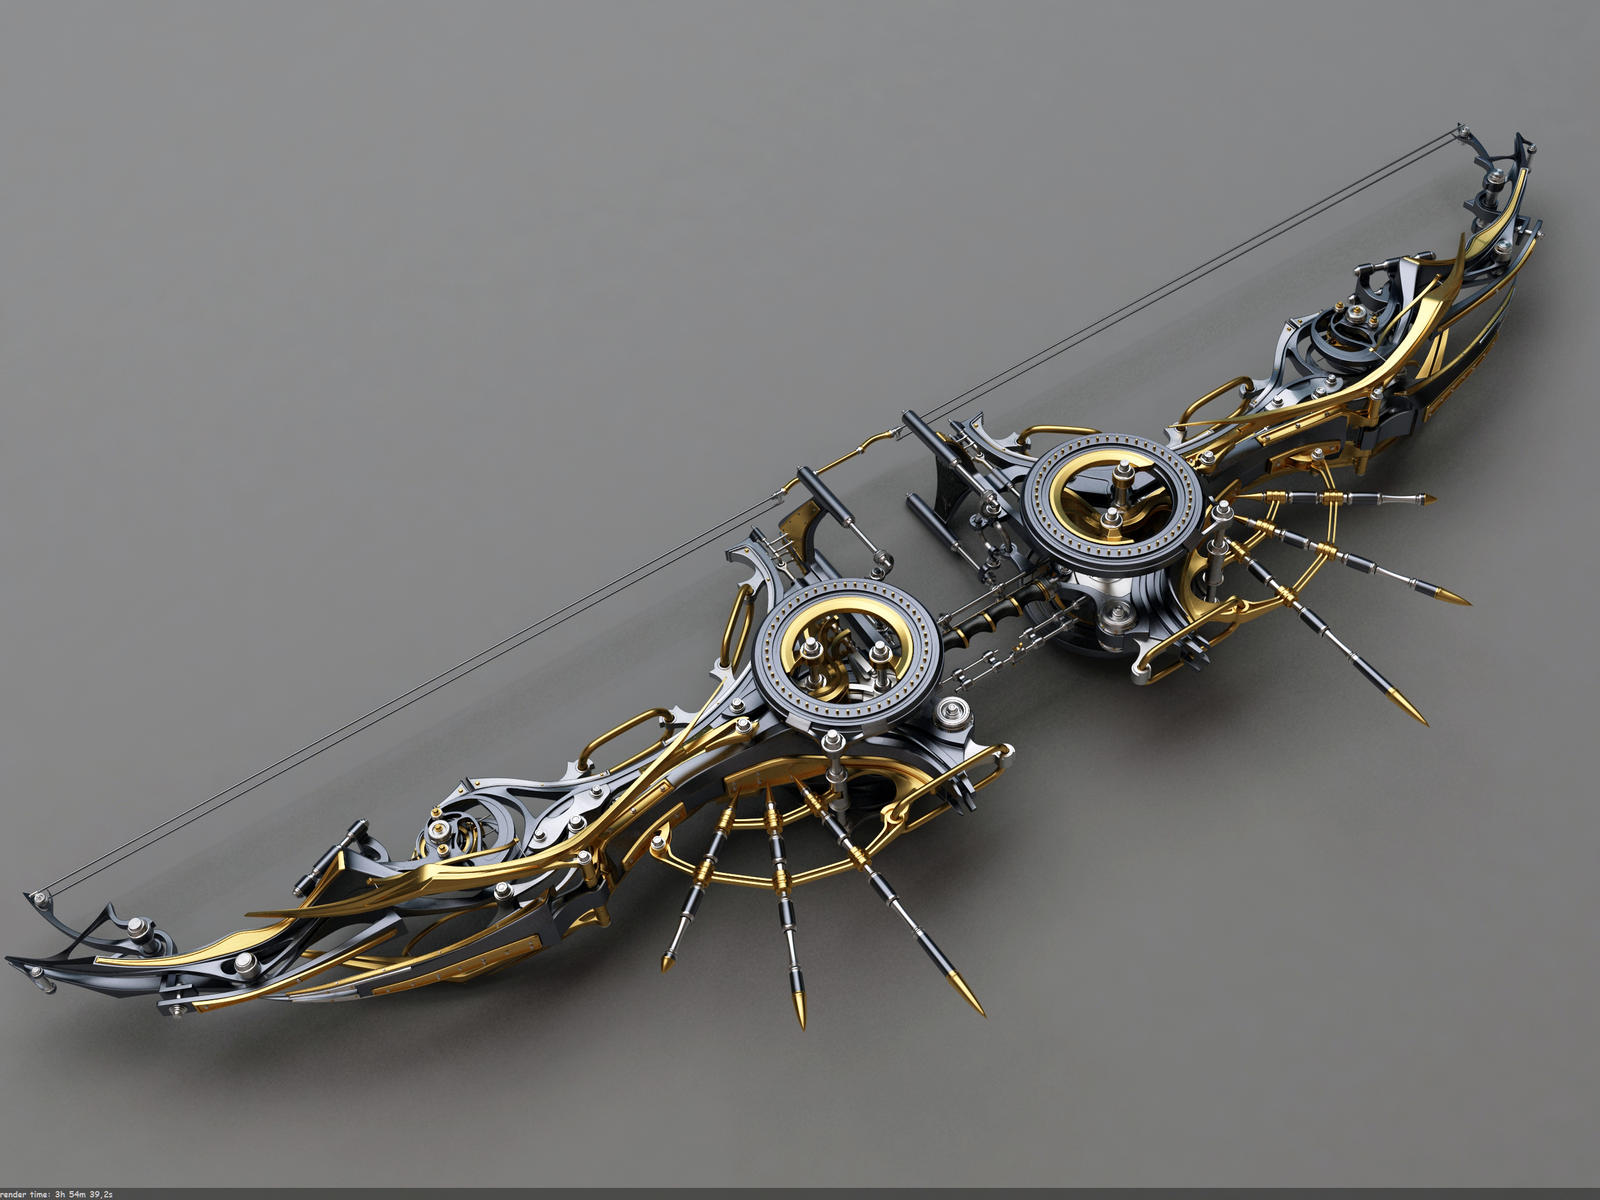 heretic_composite_bow__top_view_by_samouel-d4qtdzx.jpg